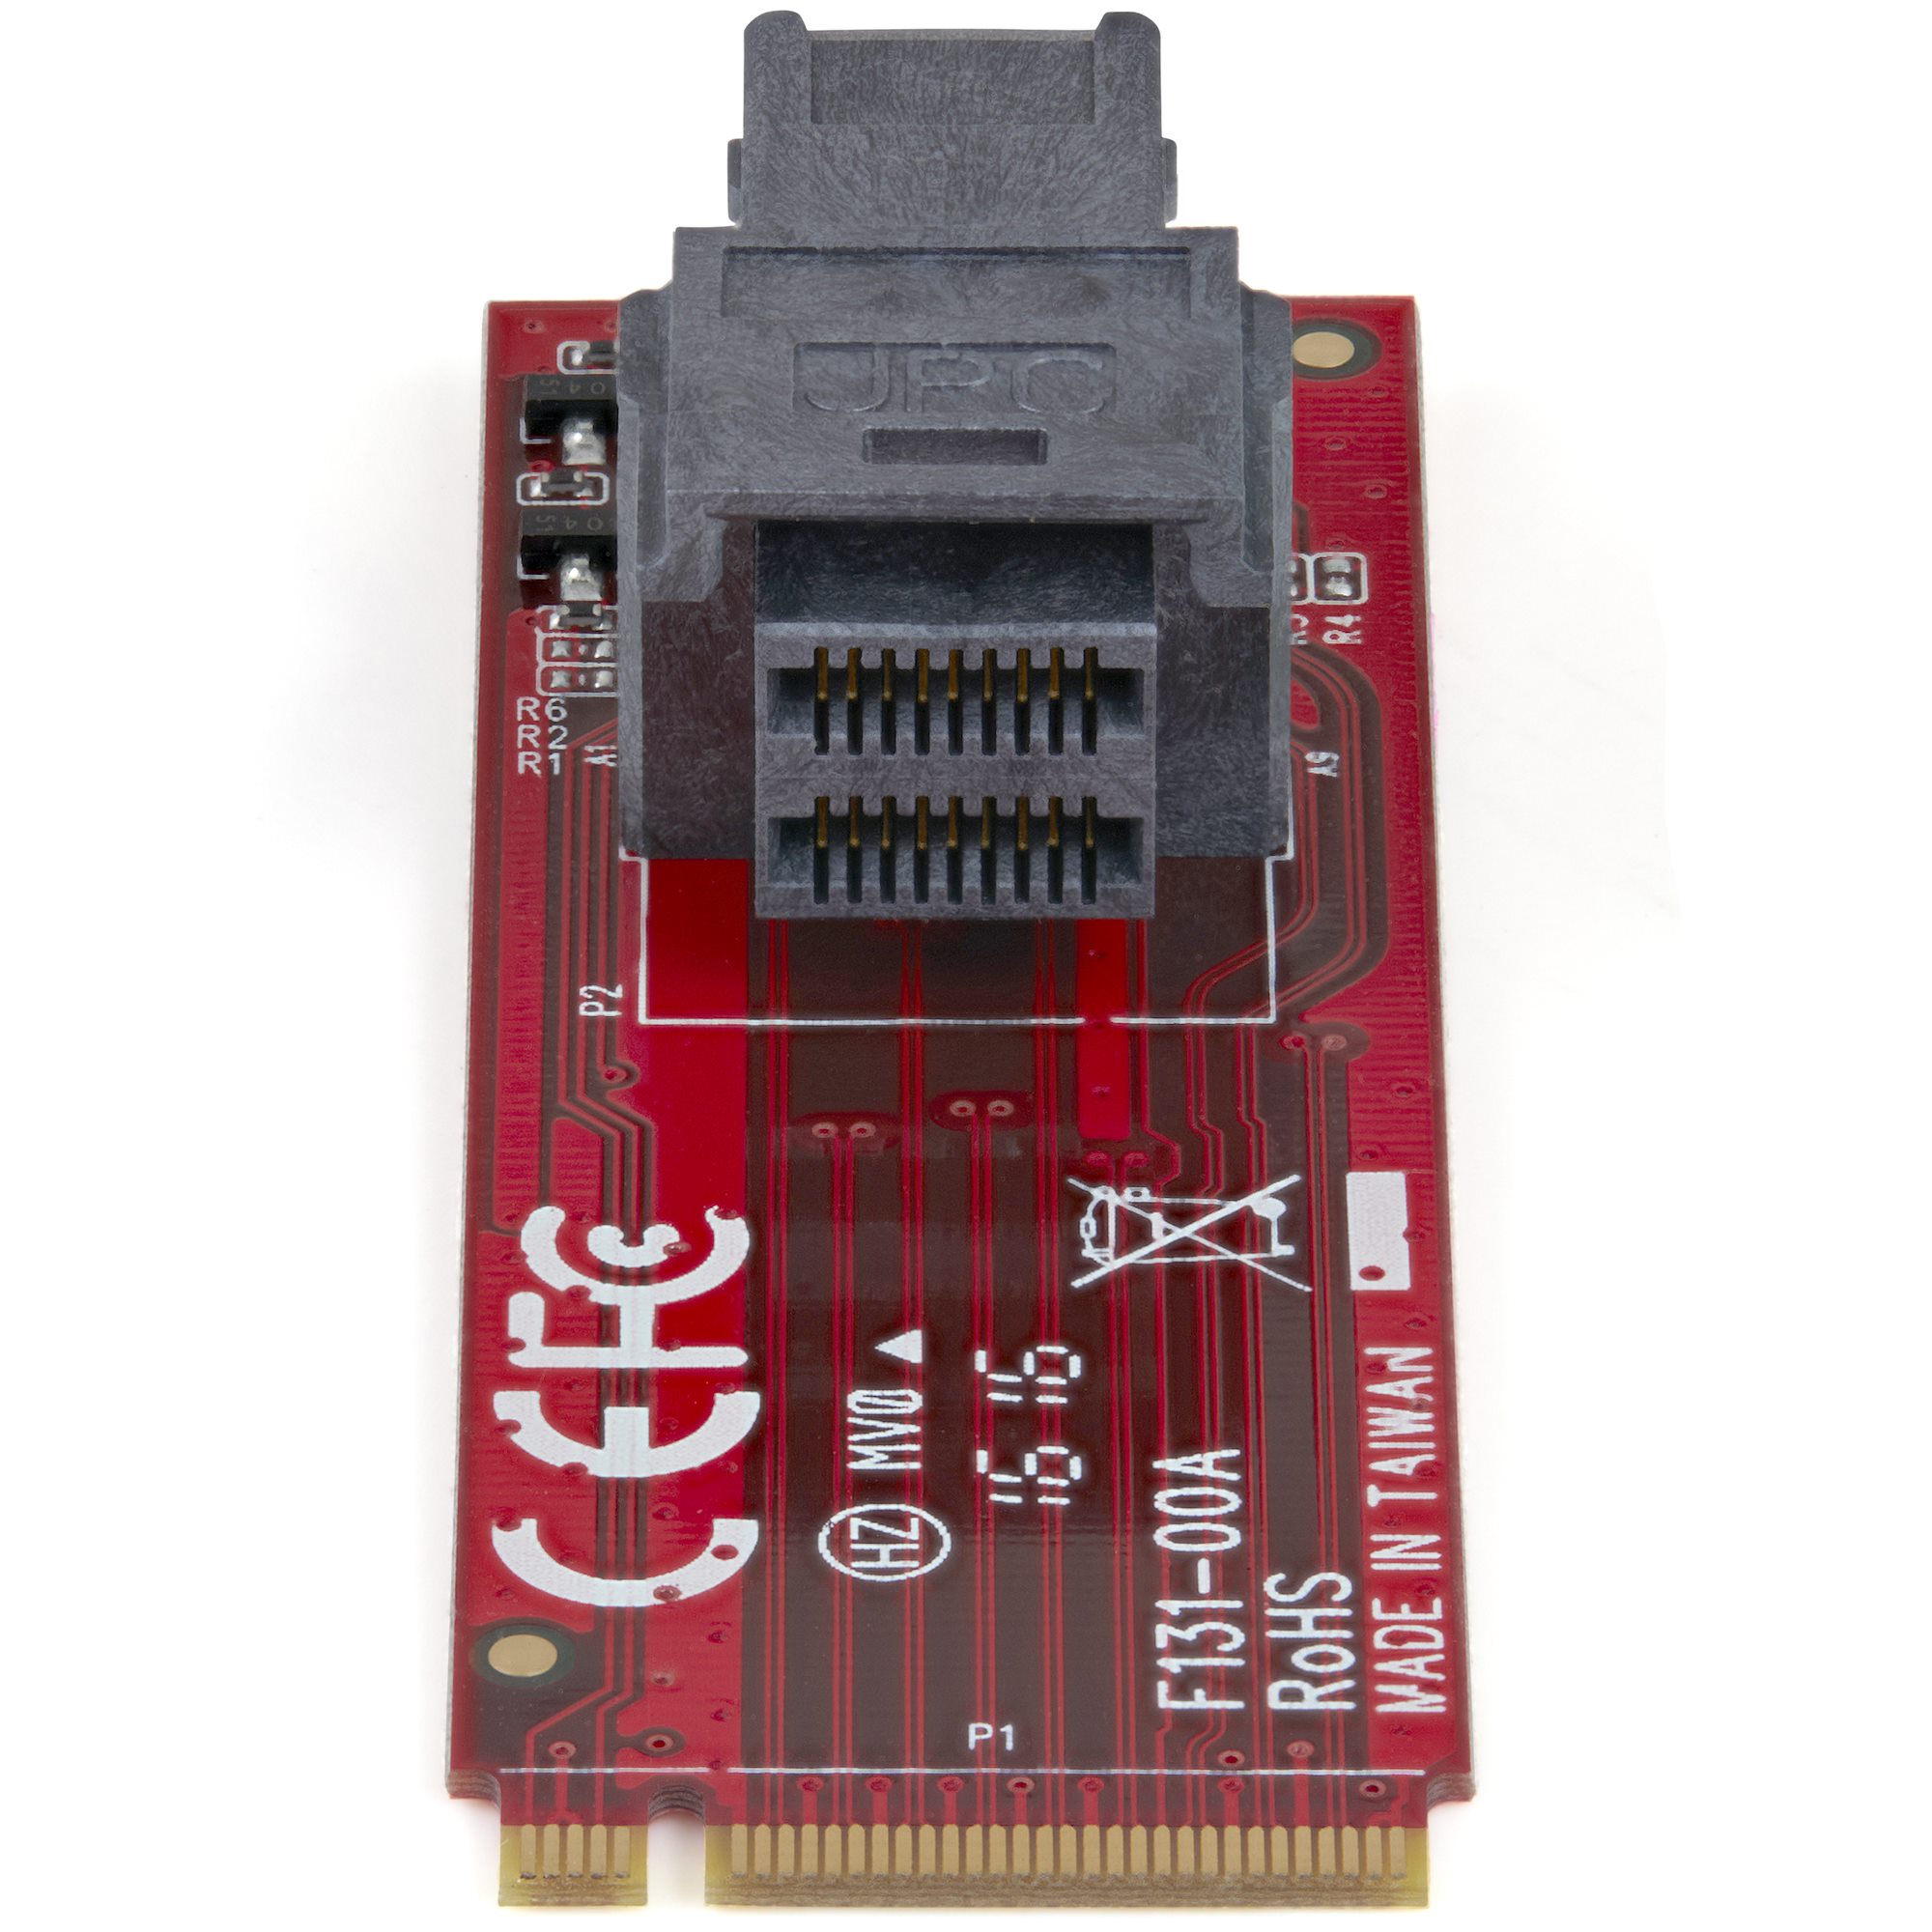 StarTech.com M.2. PCI-e NVMe to U.2 (SFF-8639) Adapter - Not Compatible  with SATA Drives or SAS Controllers - For M.2 PCIe NVMe SSDs - PCIe M.2  Drive